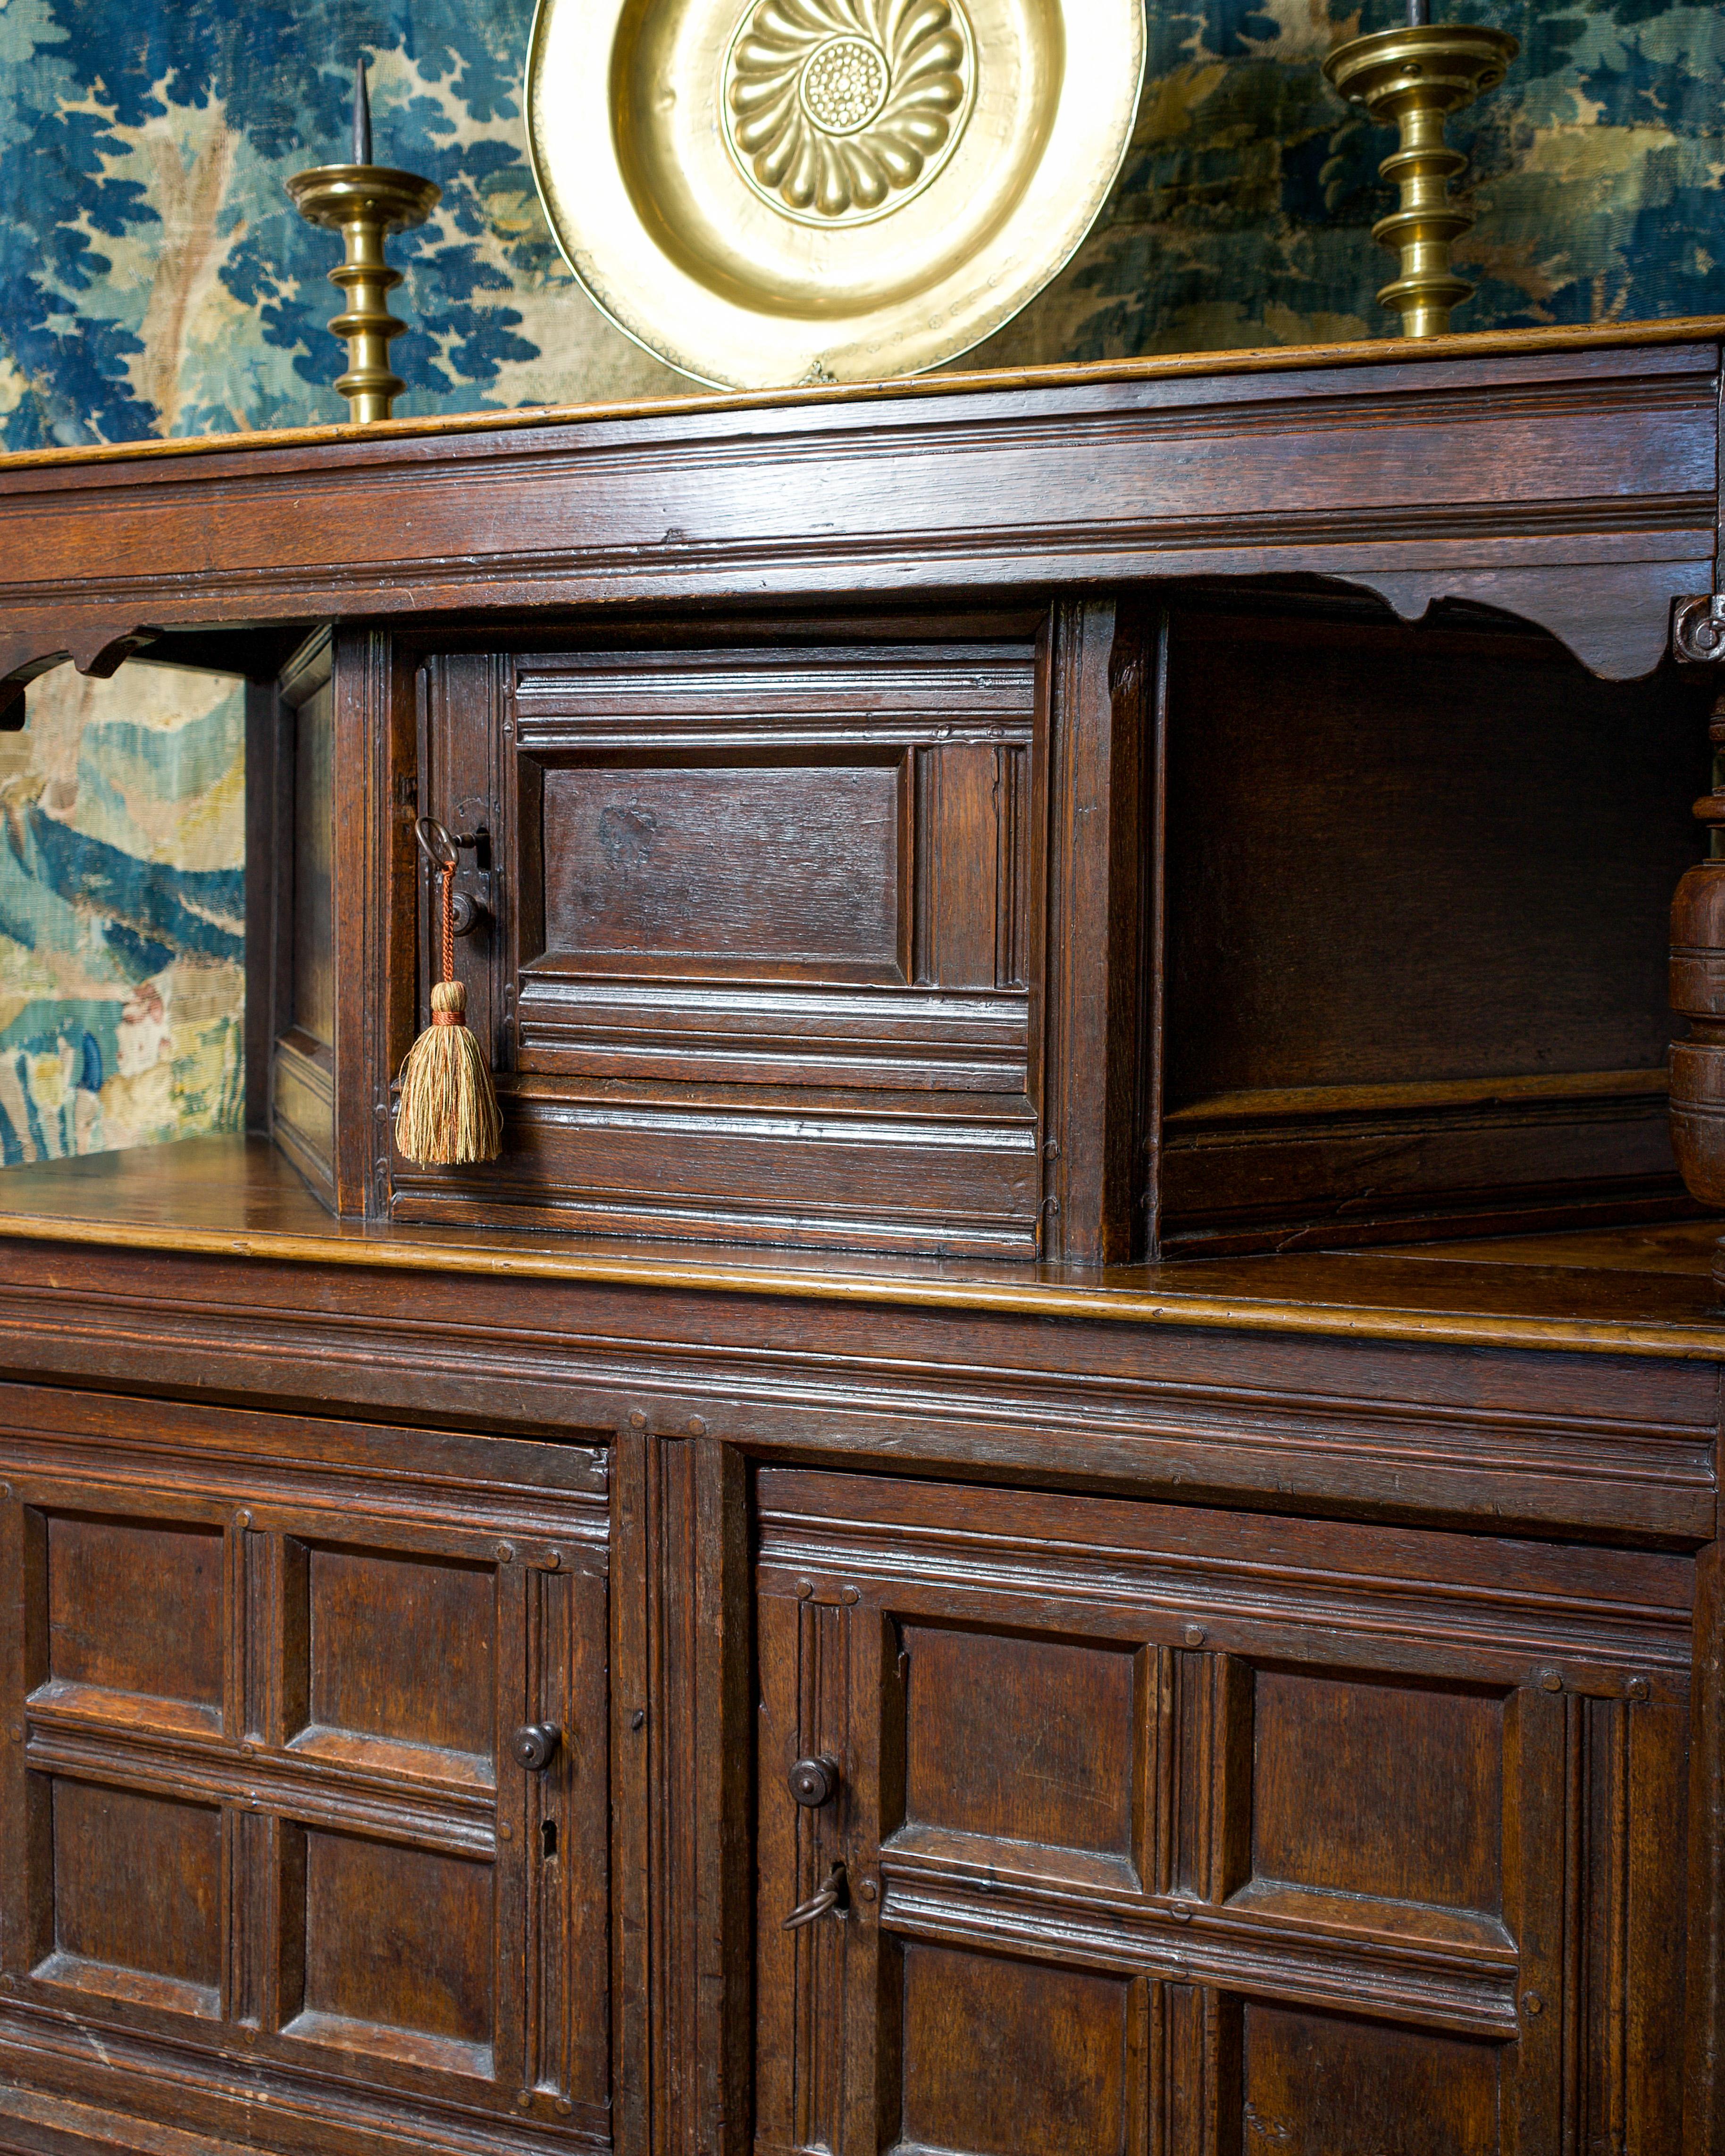 17th century canted oak livery cupboard, with plain cup & cover supports with ionic capitals.